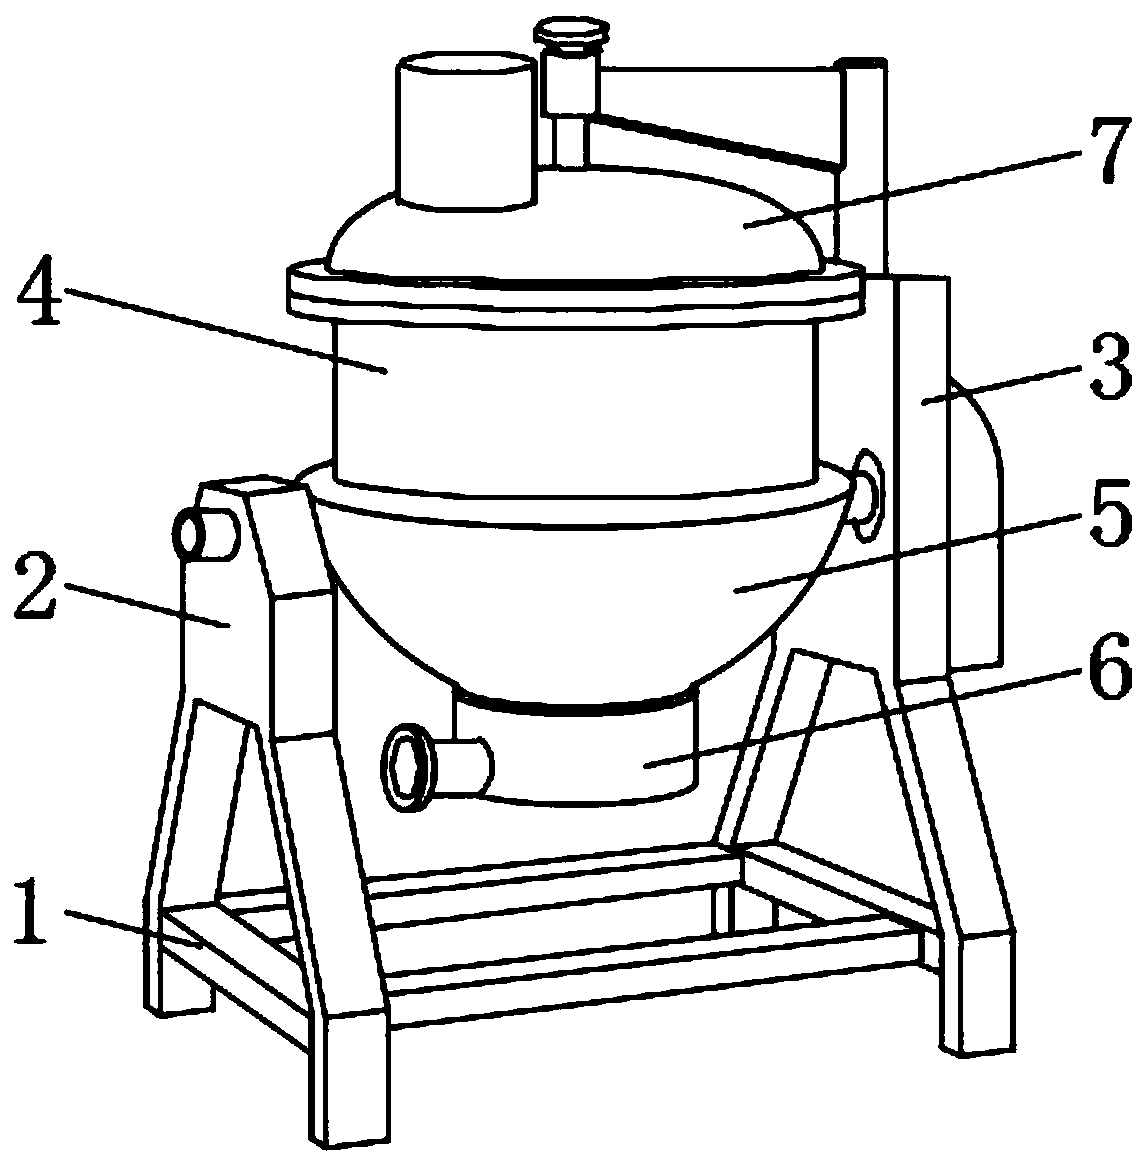 Extraction tank device for soy proteins